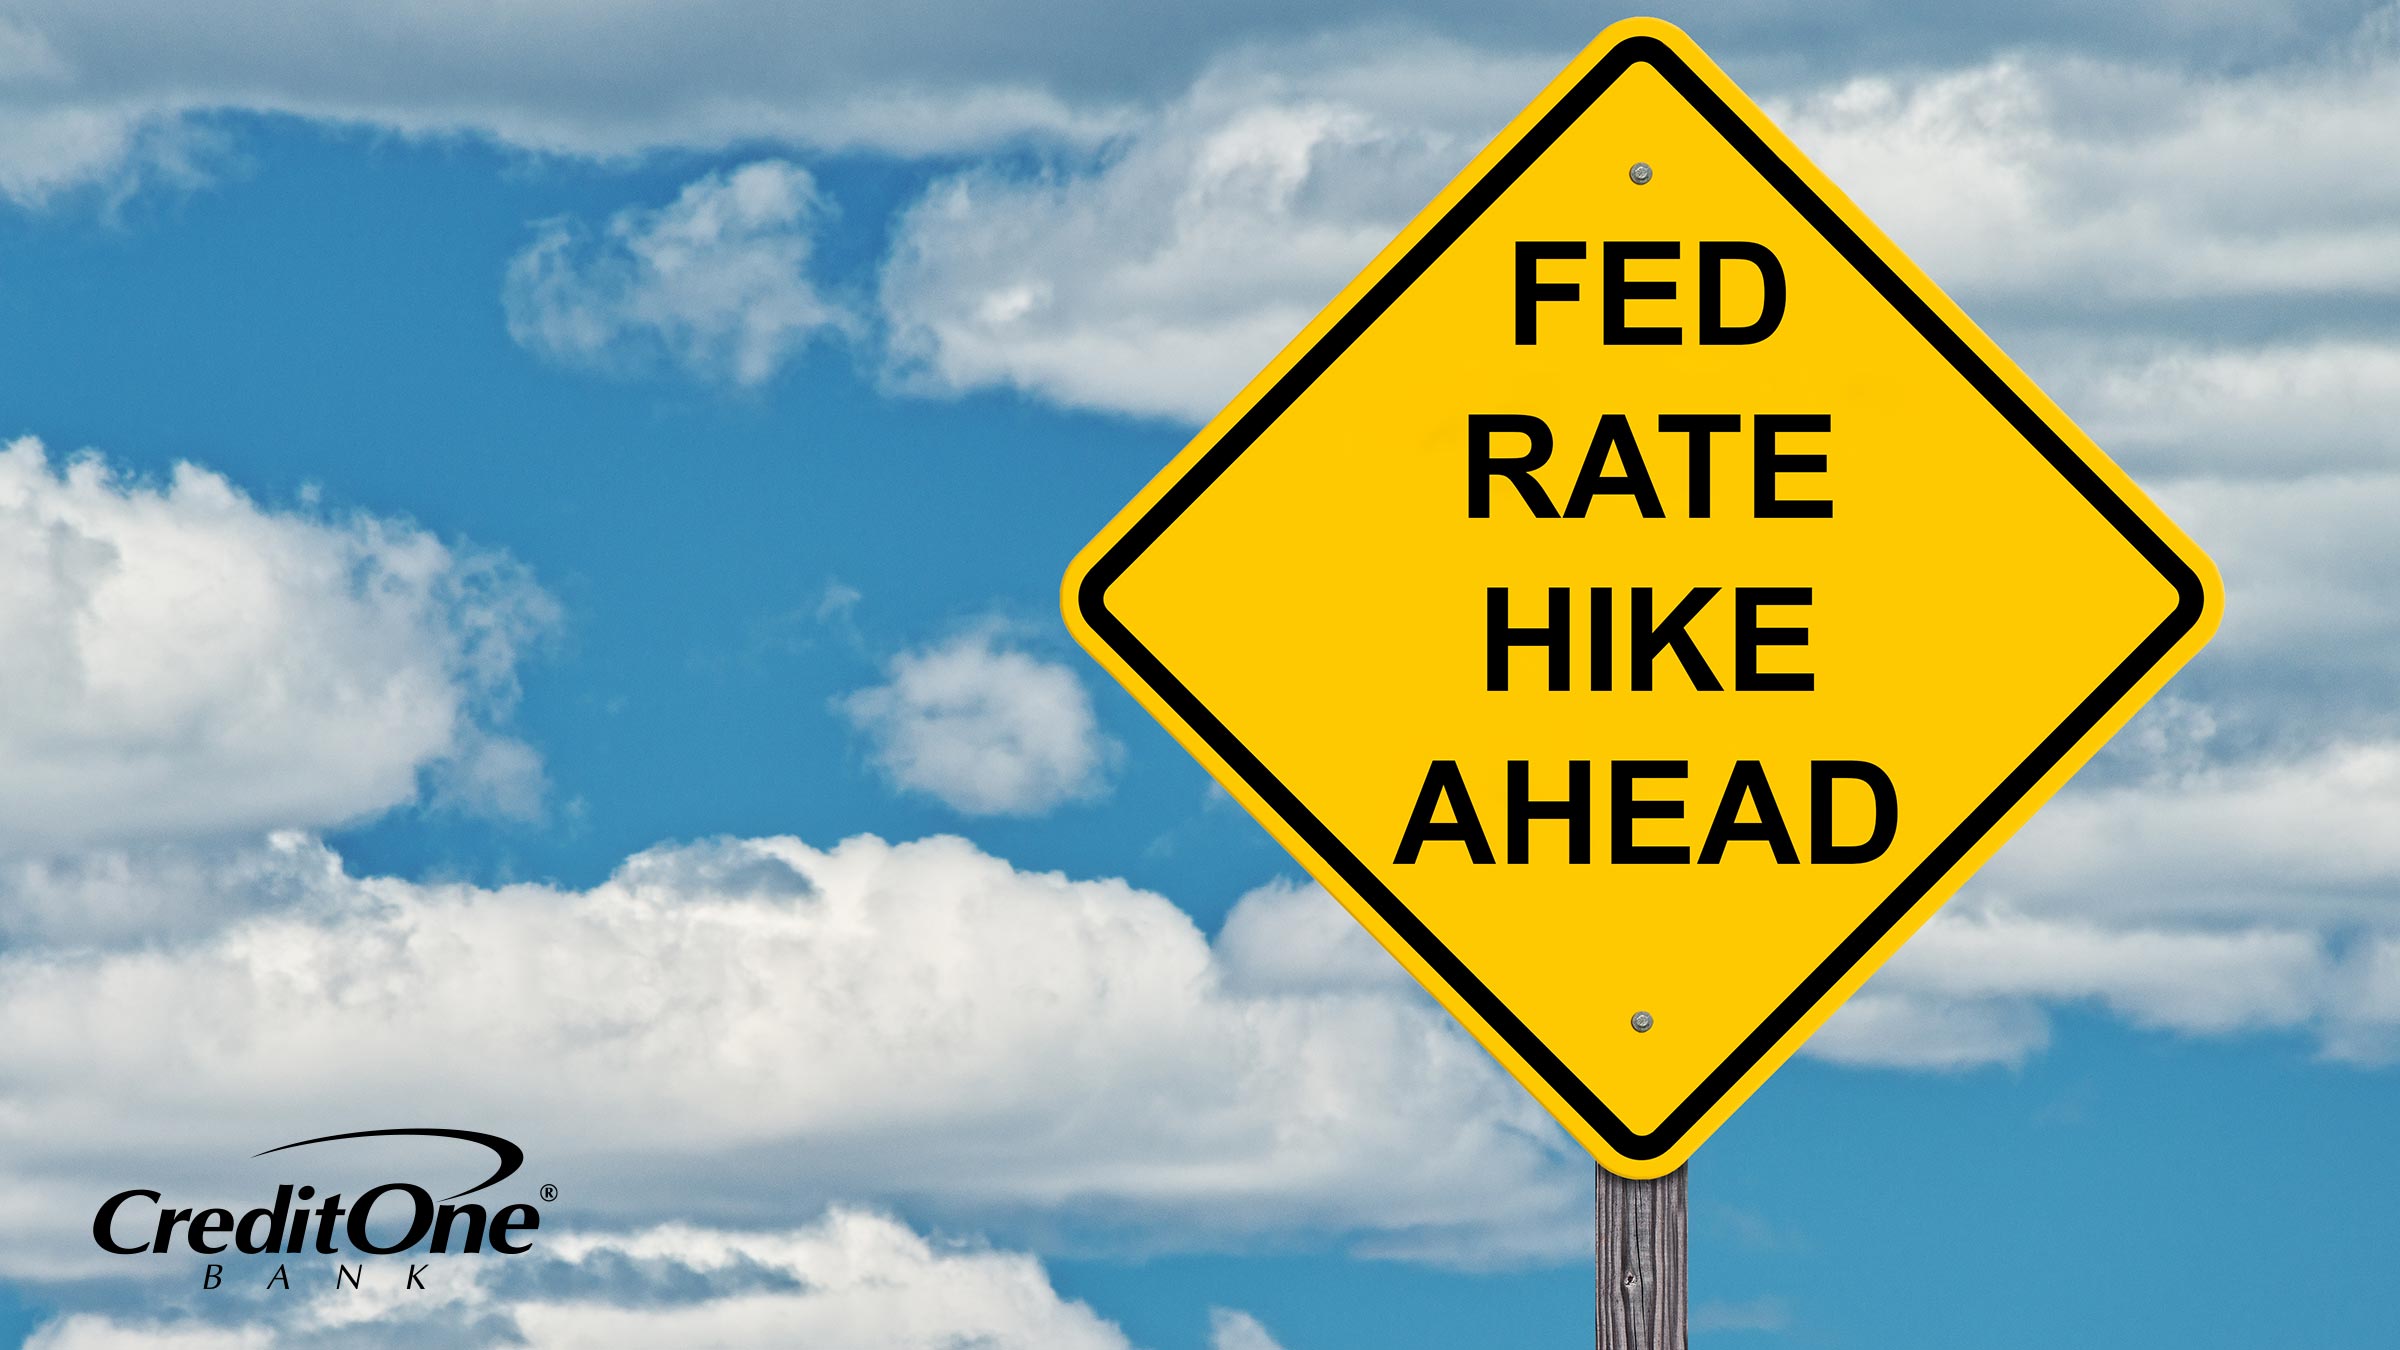 A street sign alerting of a fed rate hike ahead.